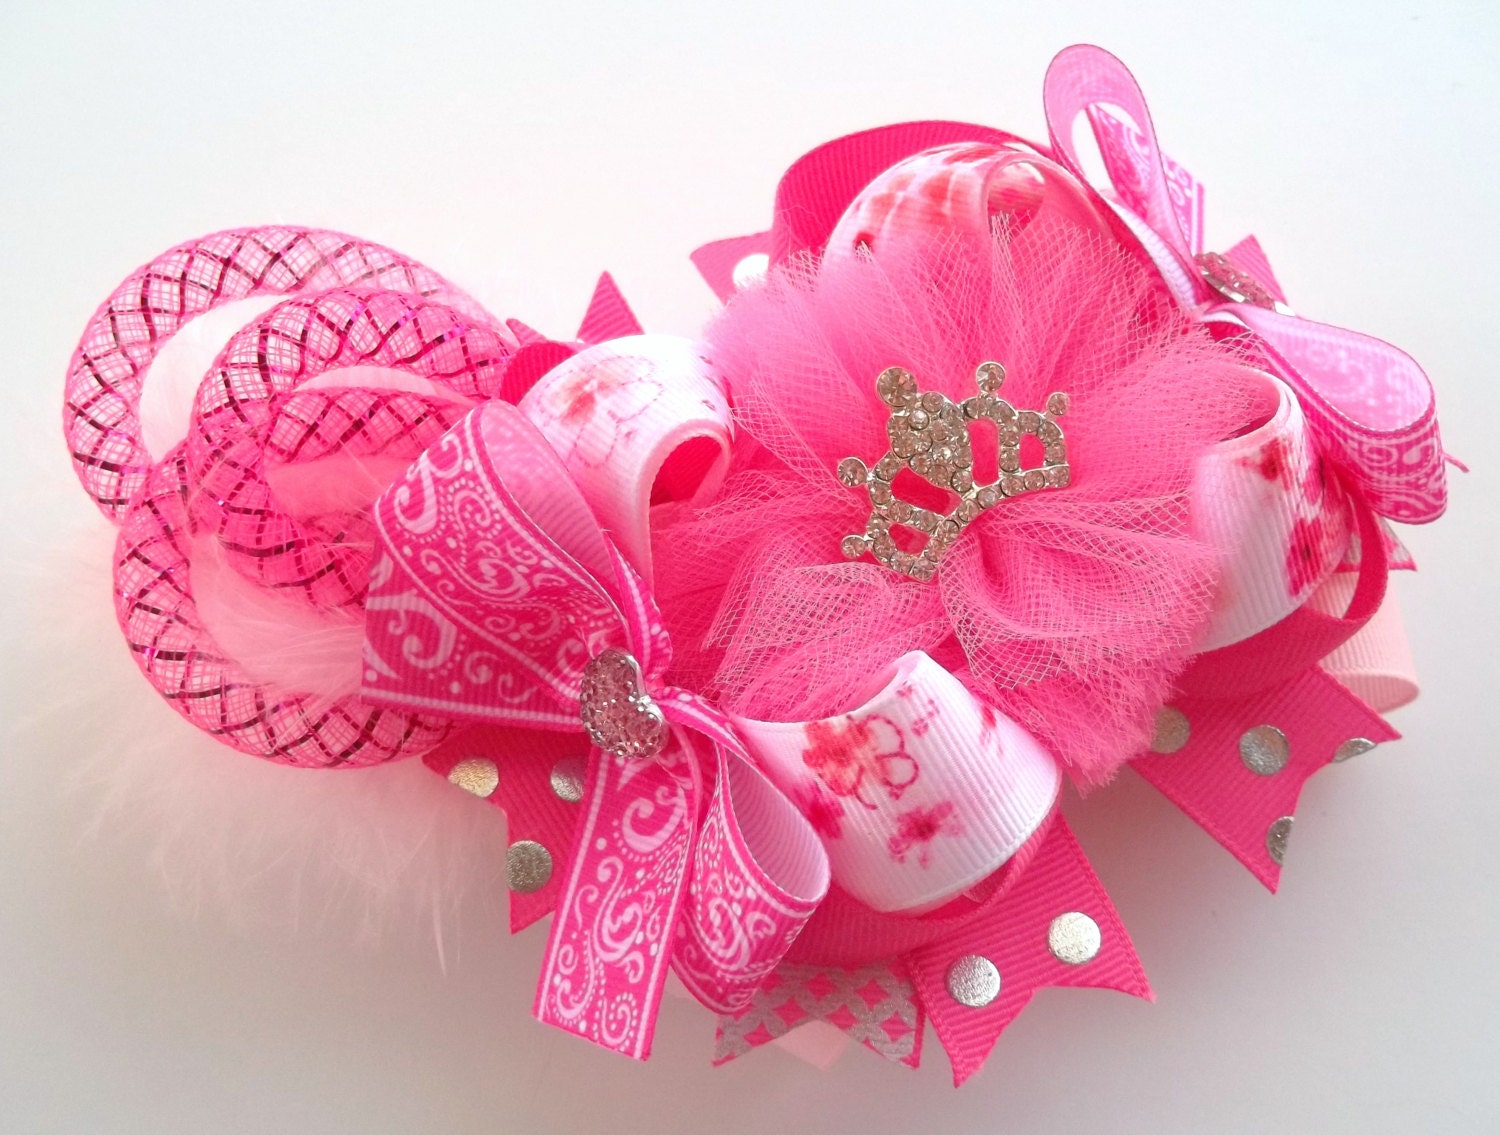 Princess OTT Pink With Rhinestone Crown Hair Bow Boutique